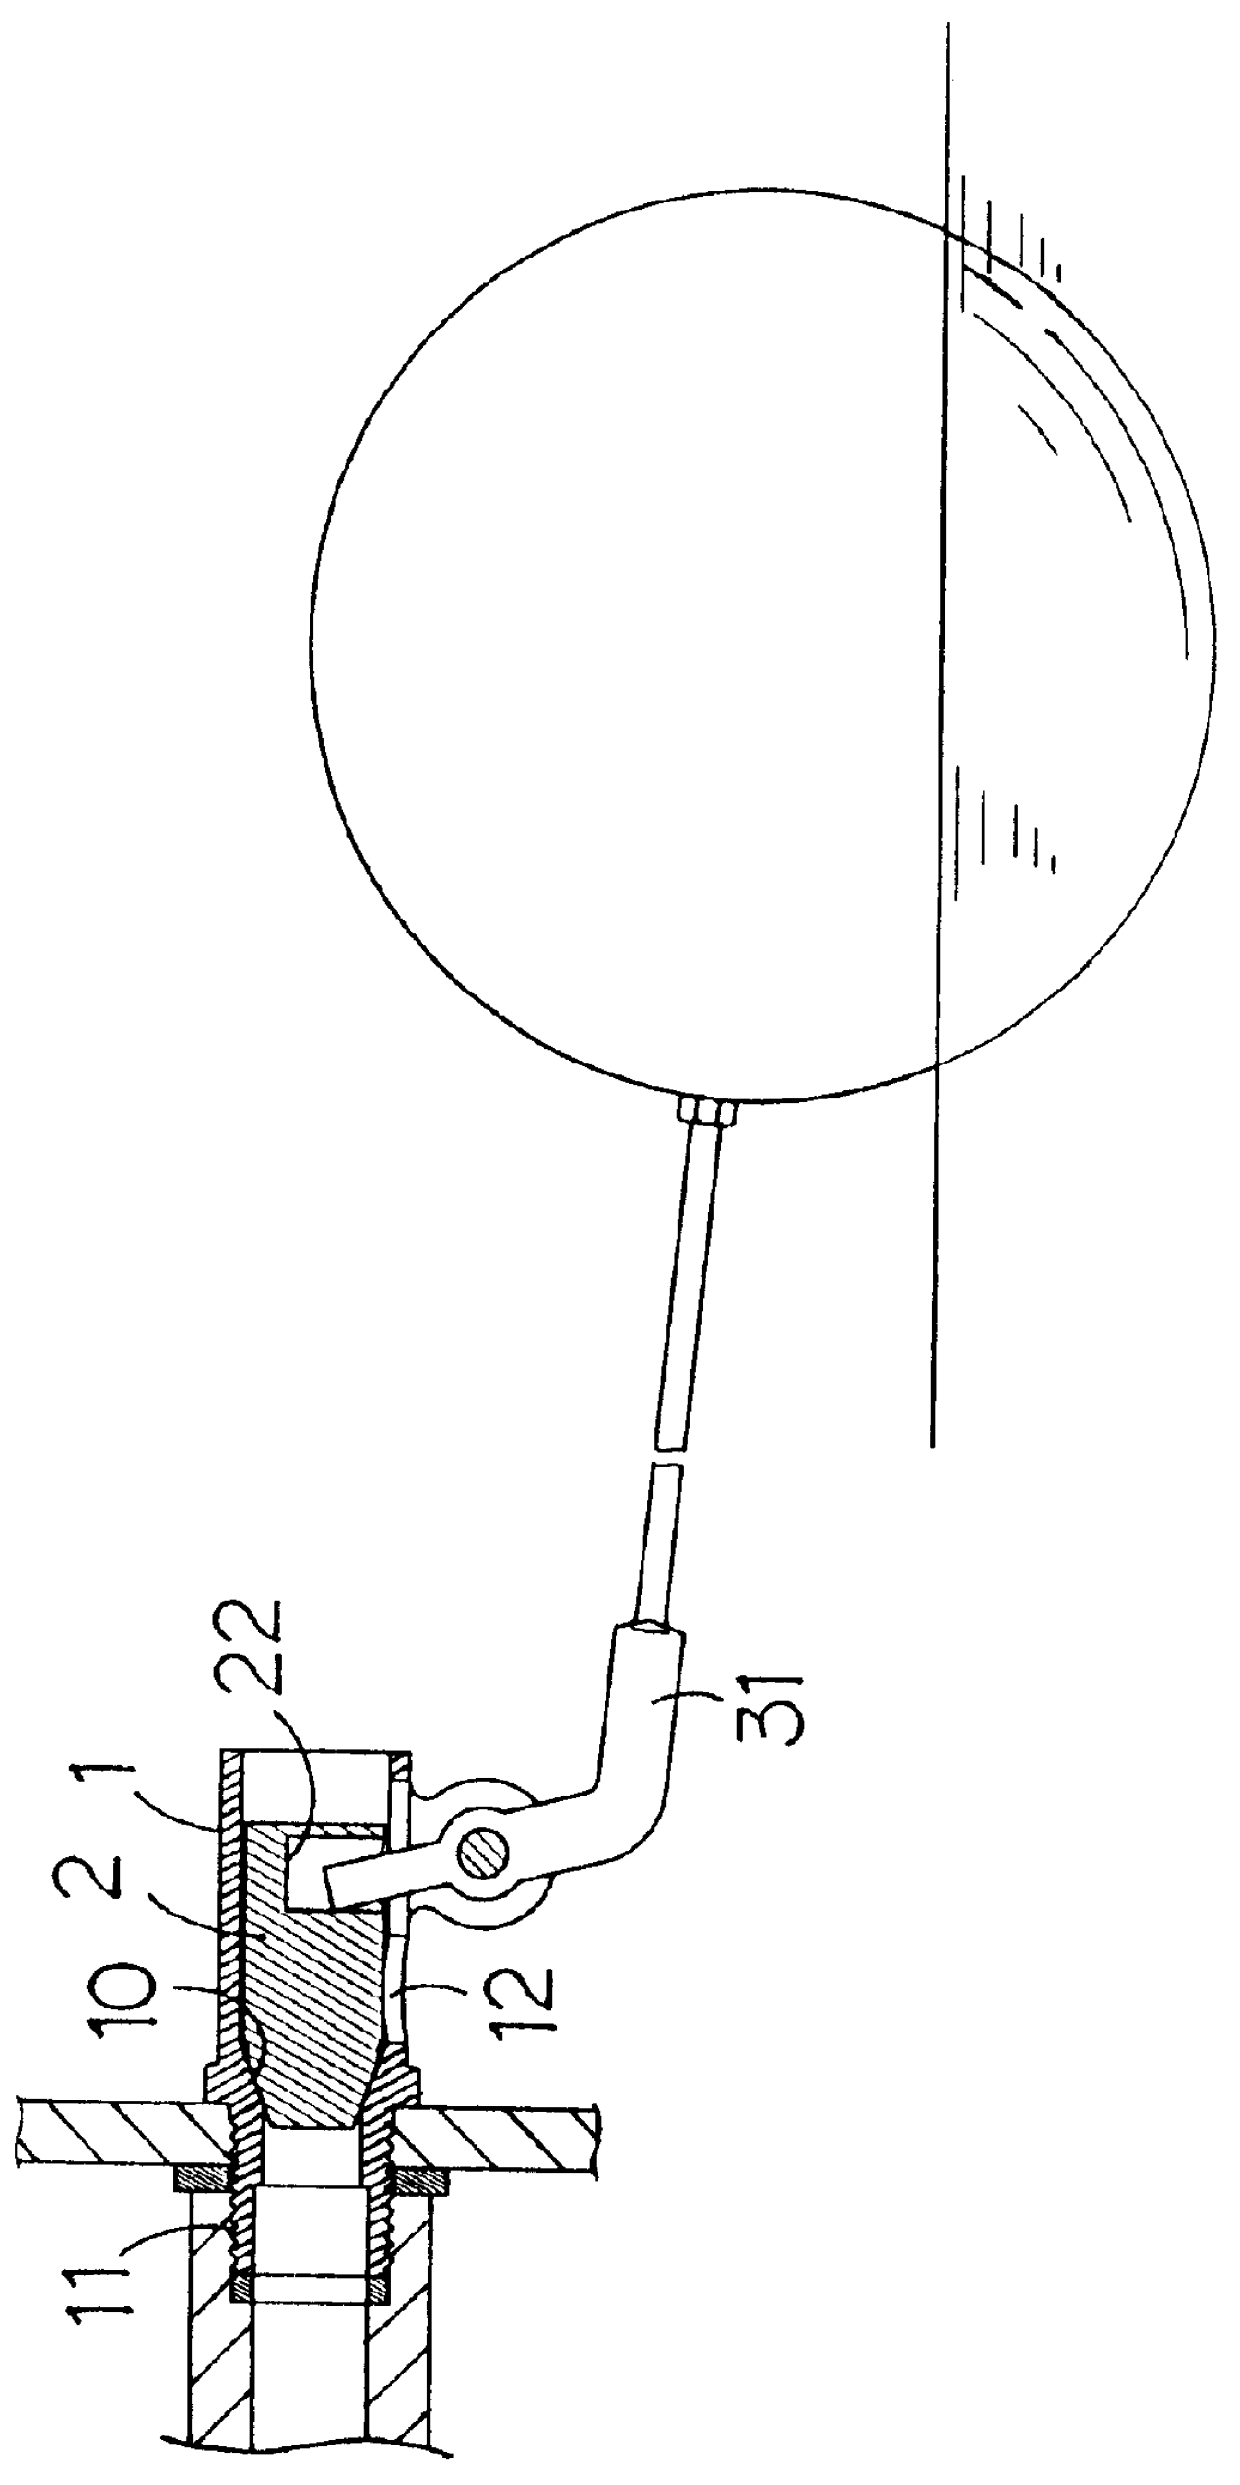 Structure of a floating-ball valve